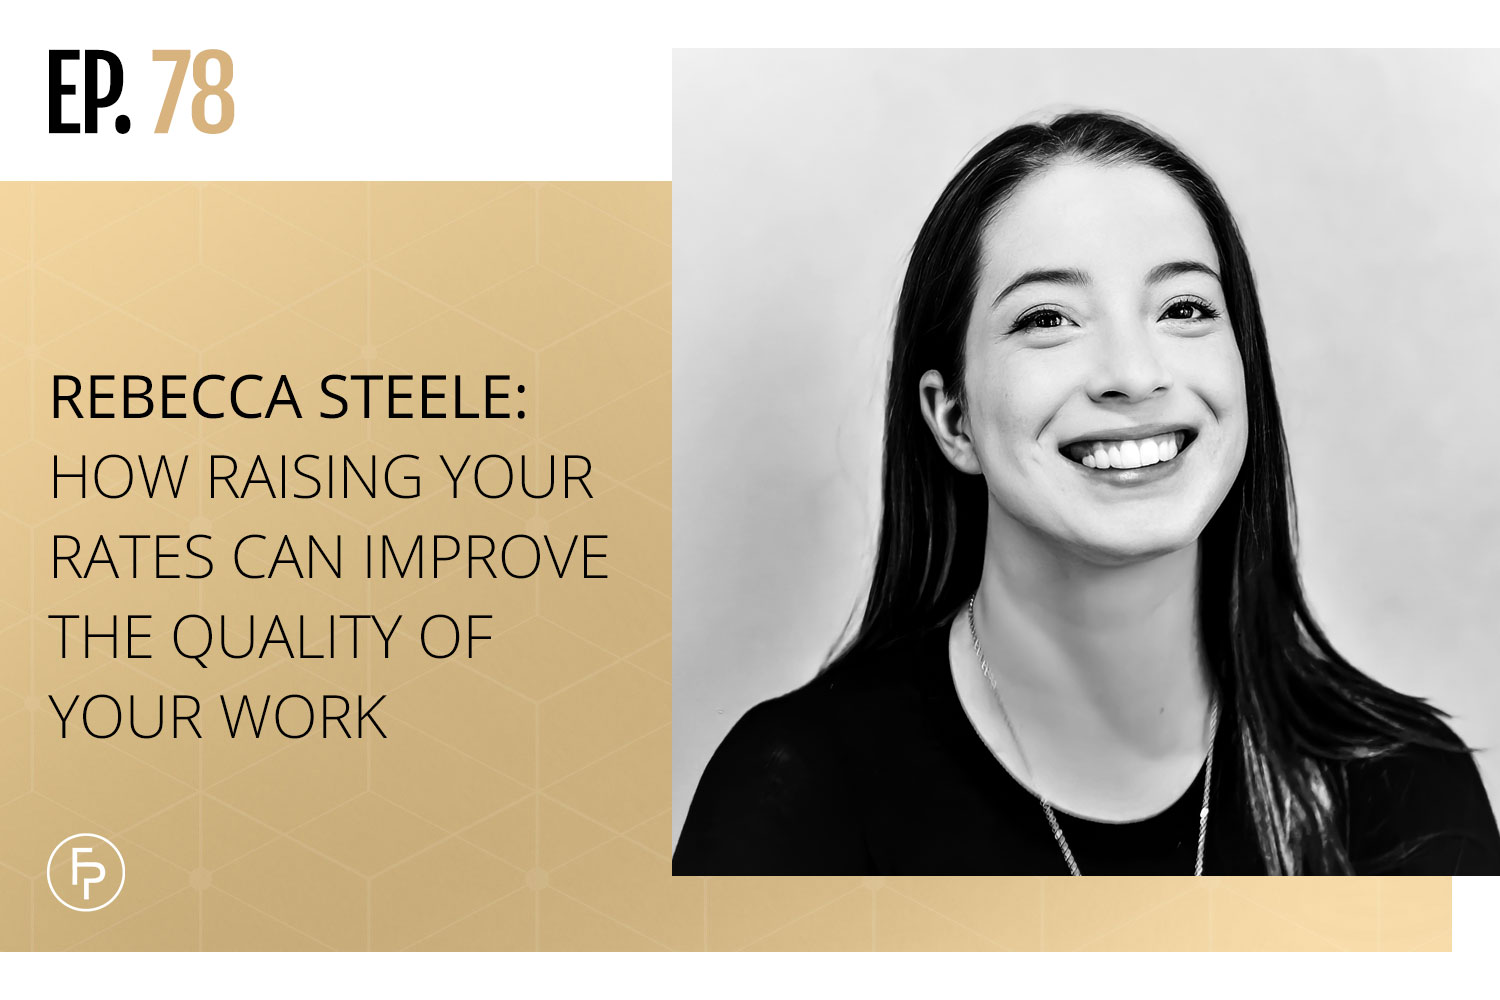 Rebecca Steele: How Raising Your Rates Can Improve the Quality of Your Work | Ep 78